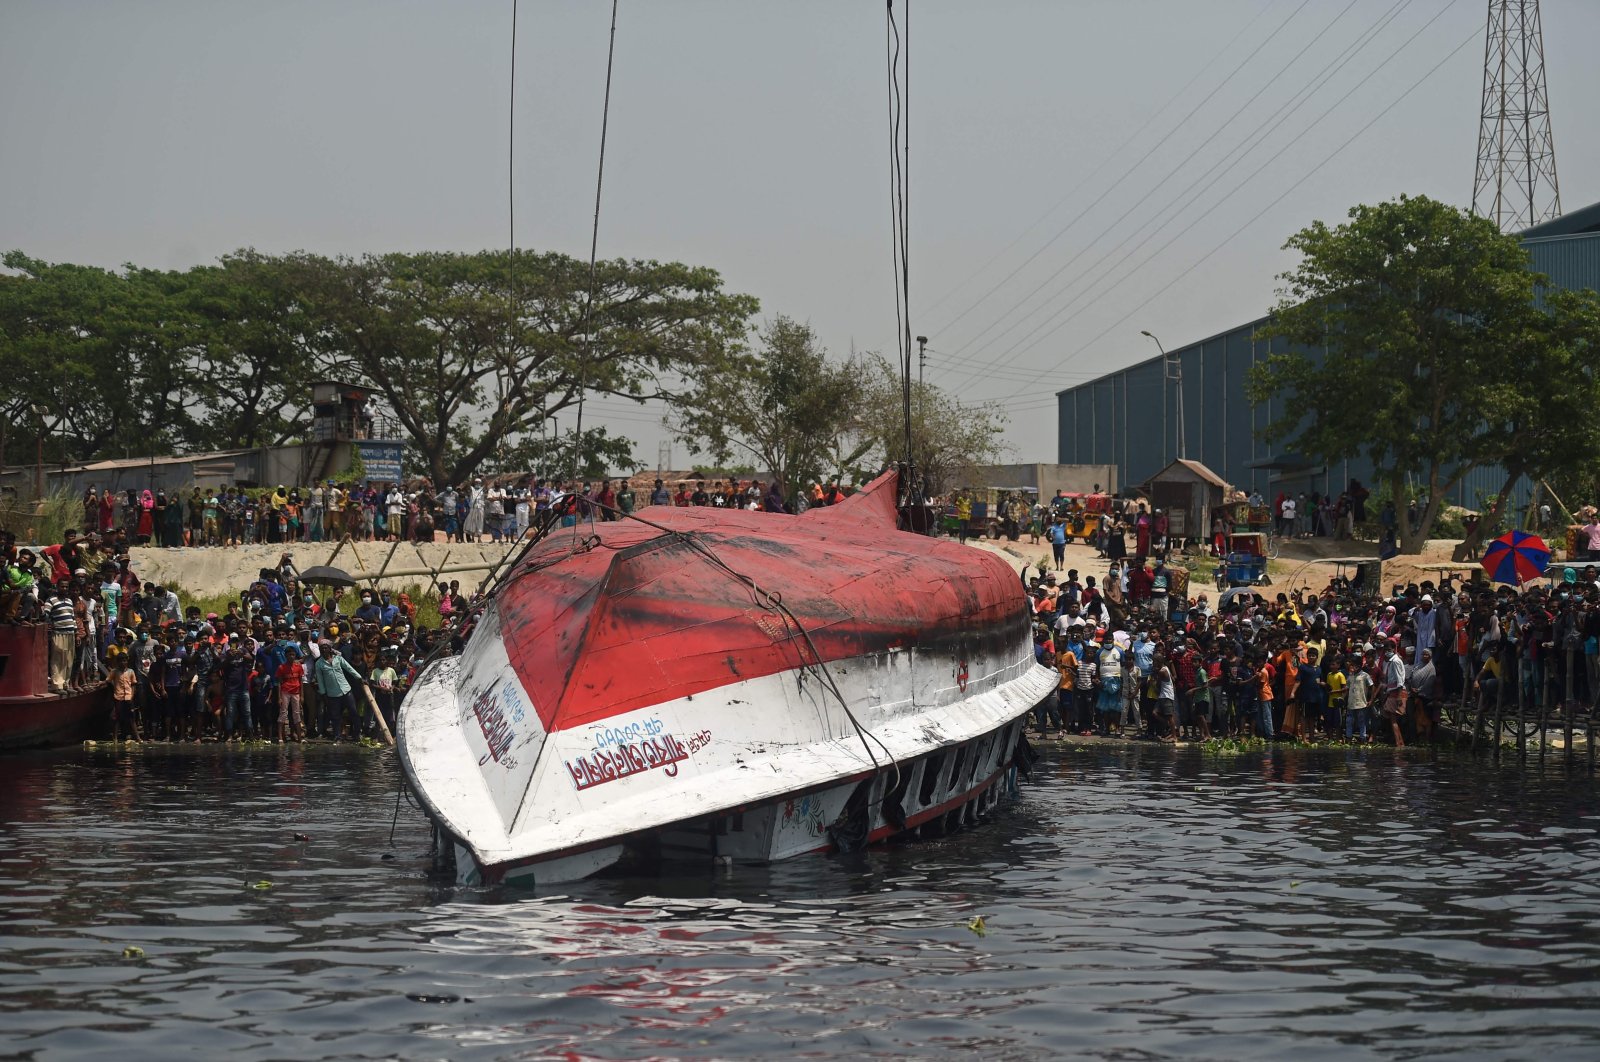 Onlookers and relatives gather after the authorities recovered the capsized boat in Shitalakshya River, in Narayanganj, Bangladesh, April 5, 2021. (AFP Photo)